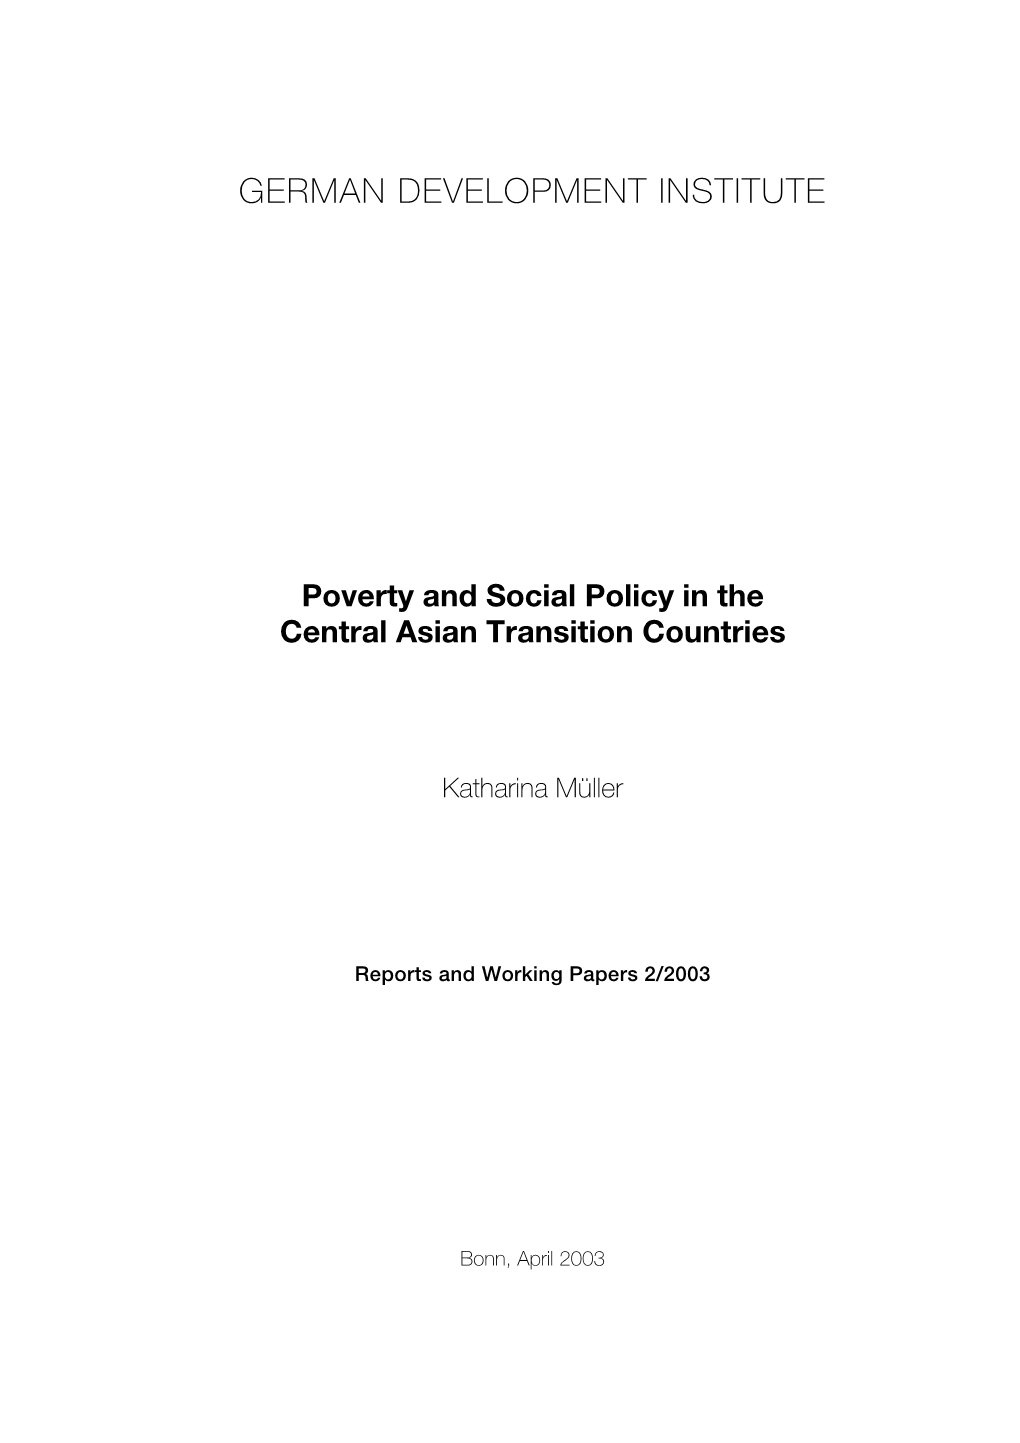 Poverty and Social Policy in the Central Asian Transition Countries